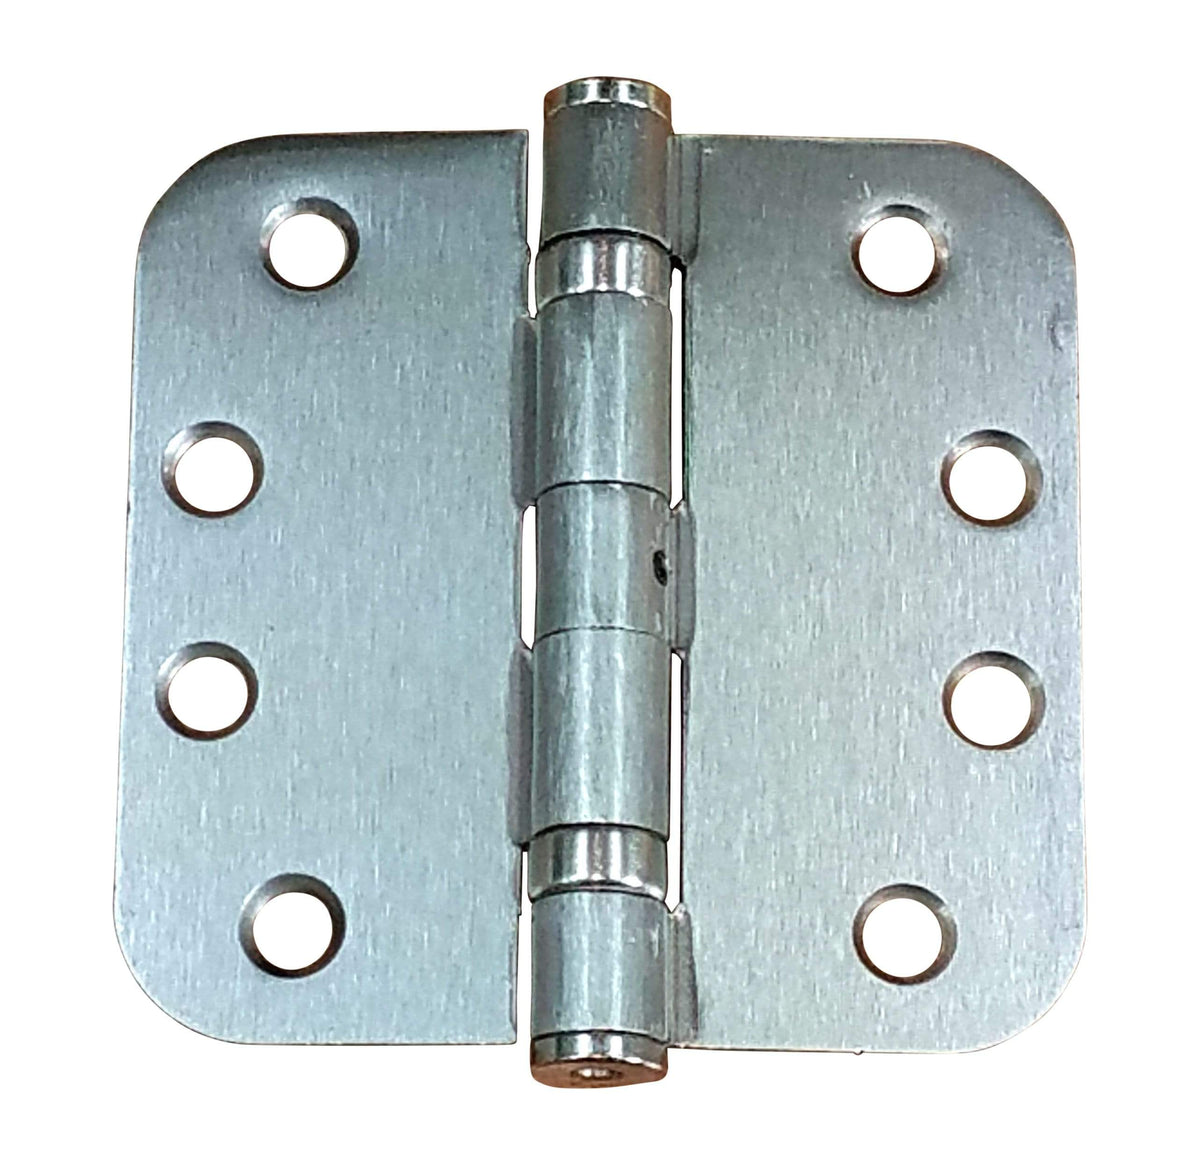 Commercial Ball Bearing Door Hinges - 4" Inches With 5/8" Radius Corners Multiple Finishes - Sold In Pairs